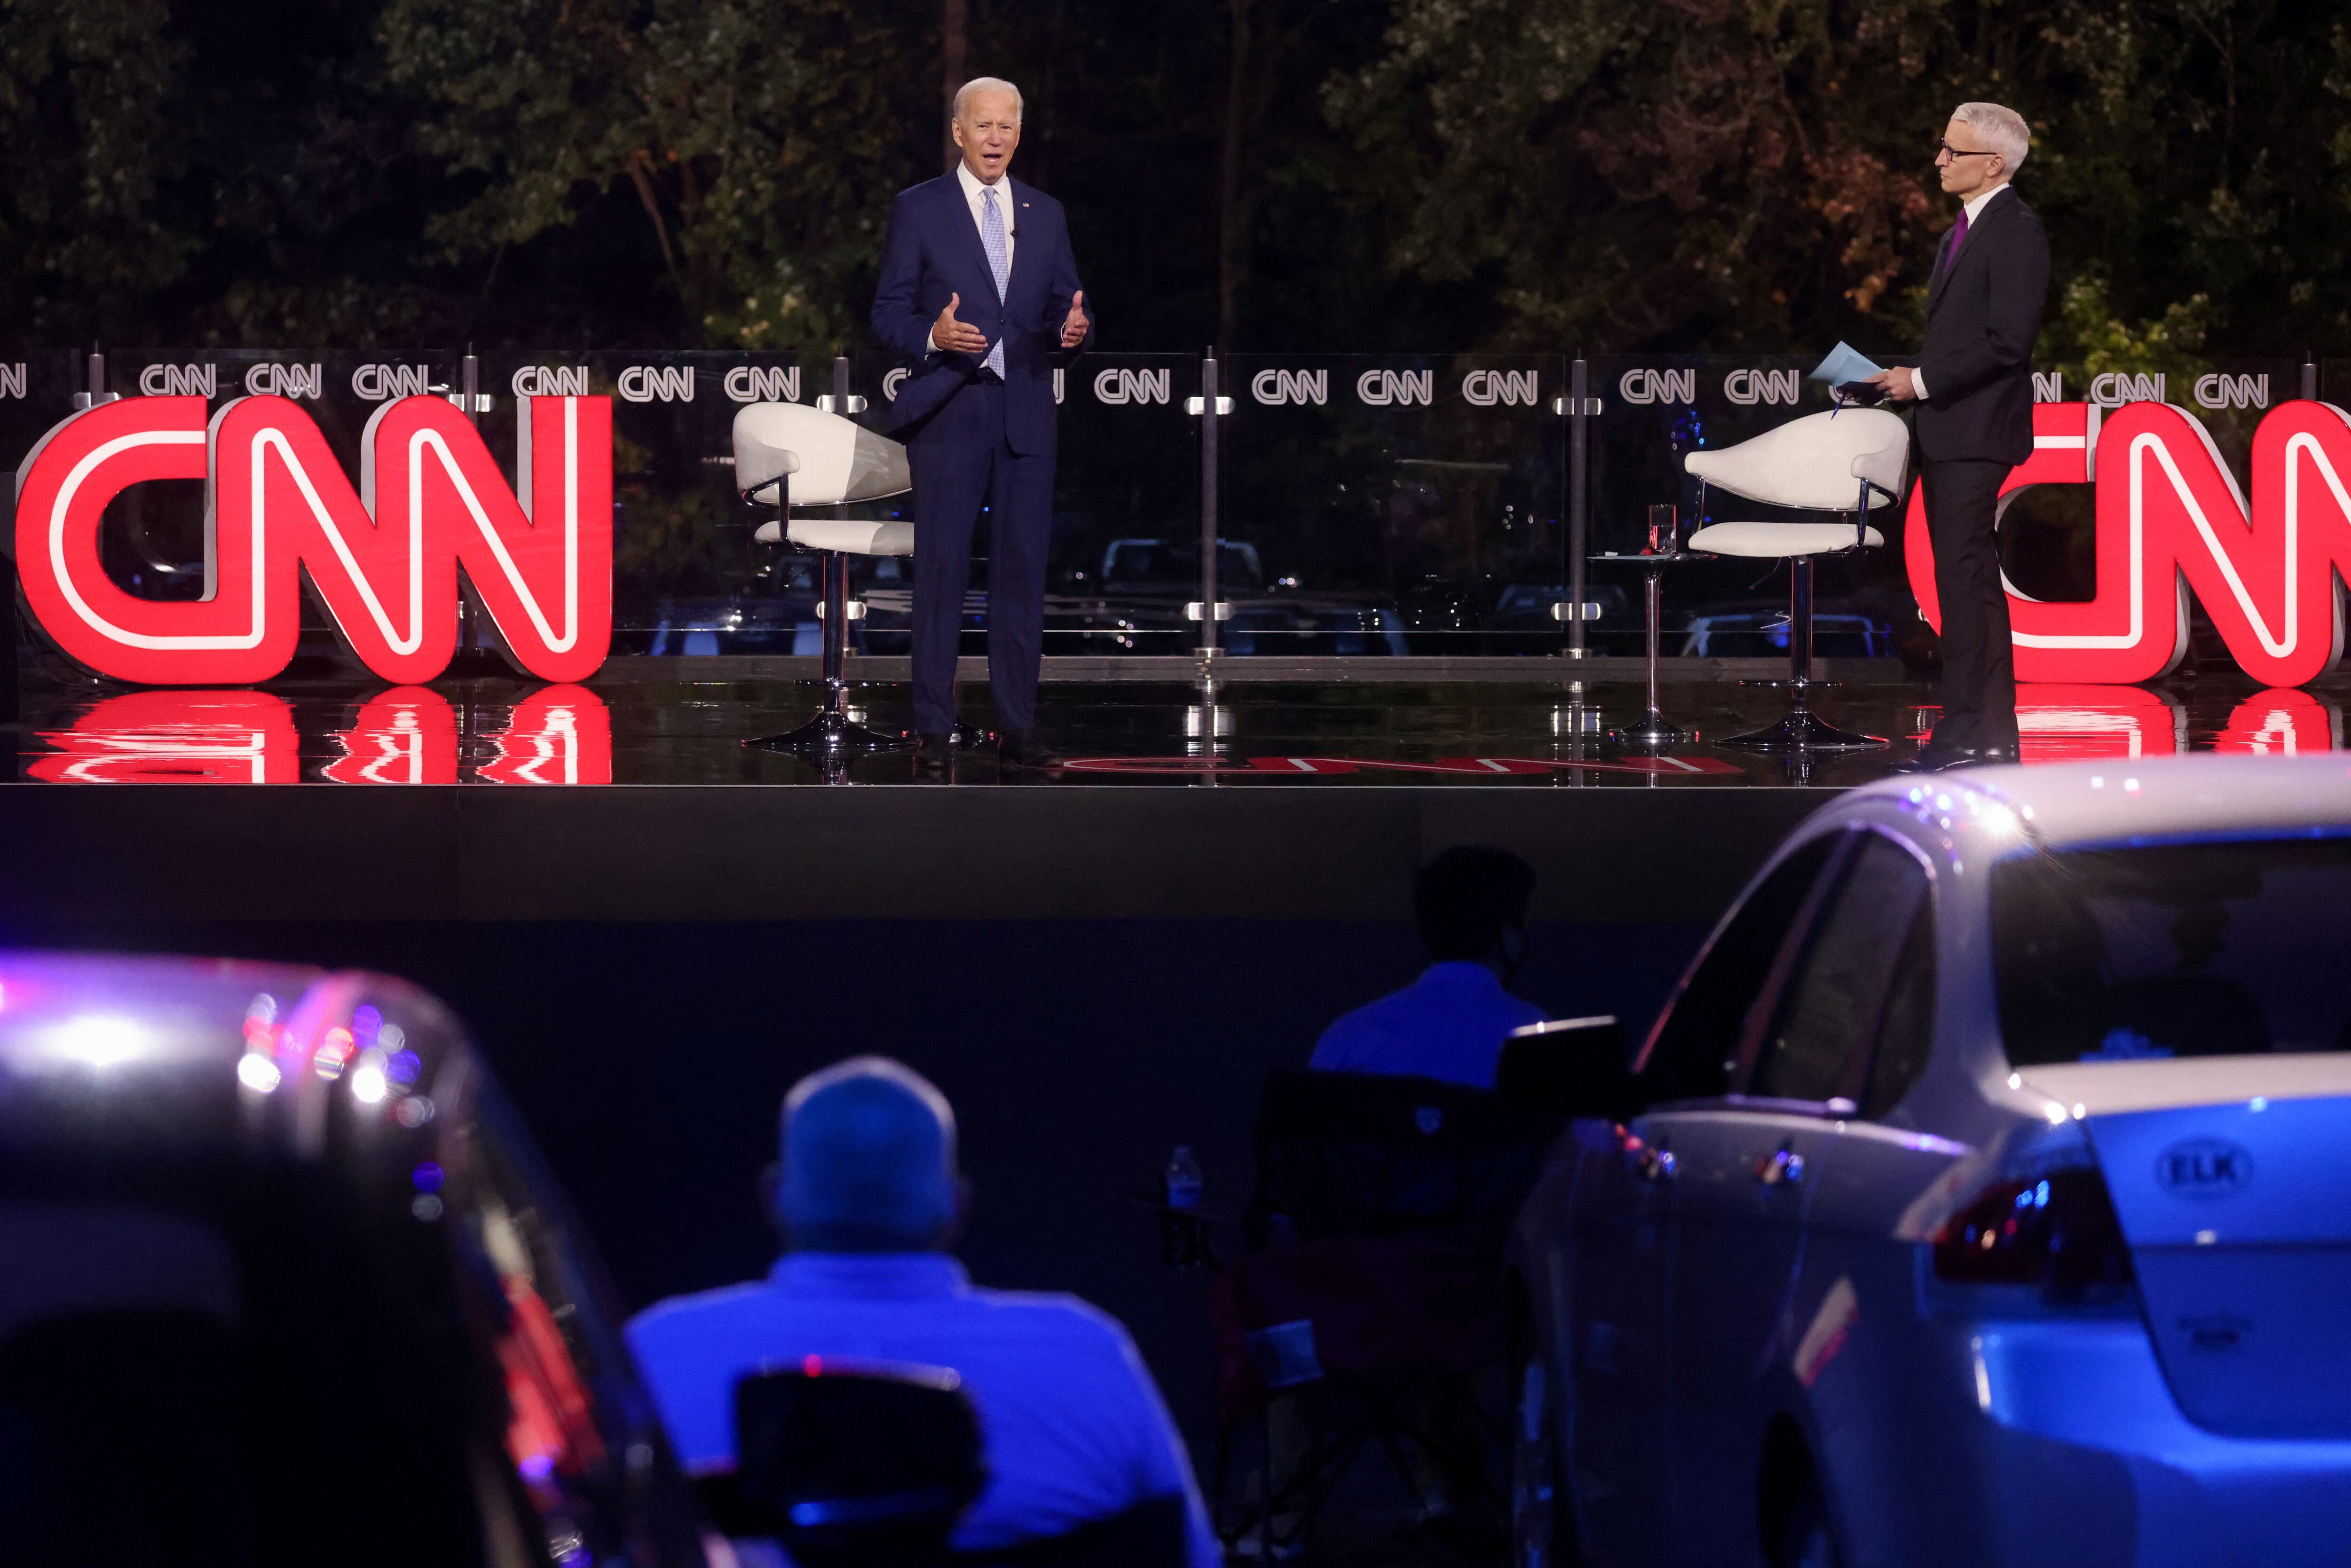 Democratic U.S. presidential nominee and former Vice President Joe Biden takes part in an outdoor town hall meeting with CNN host Anderson Cooper in Scranton, Pennsylvania, U.S. September 17, 2020. REUTERS/Jonathan Ernst